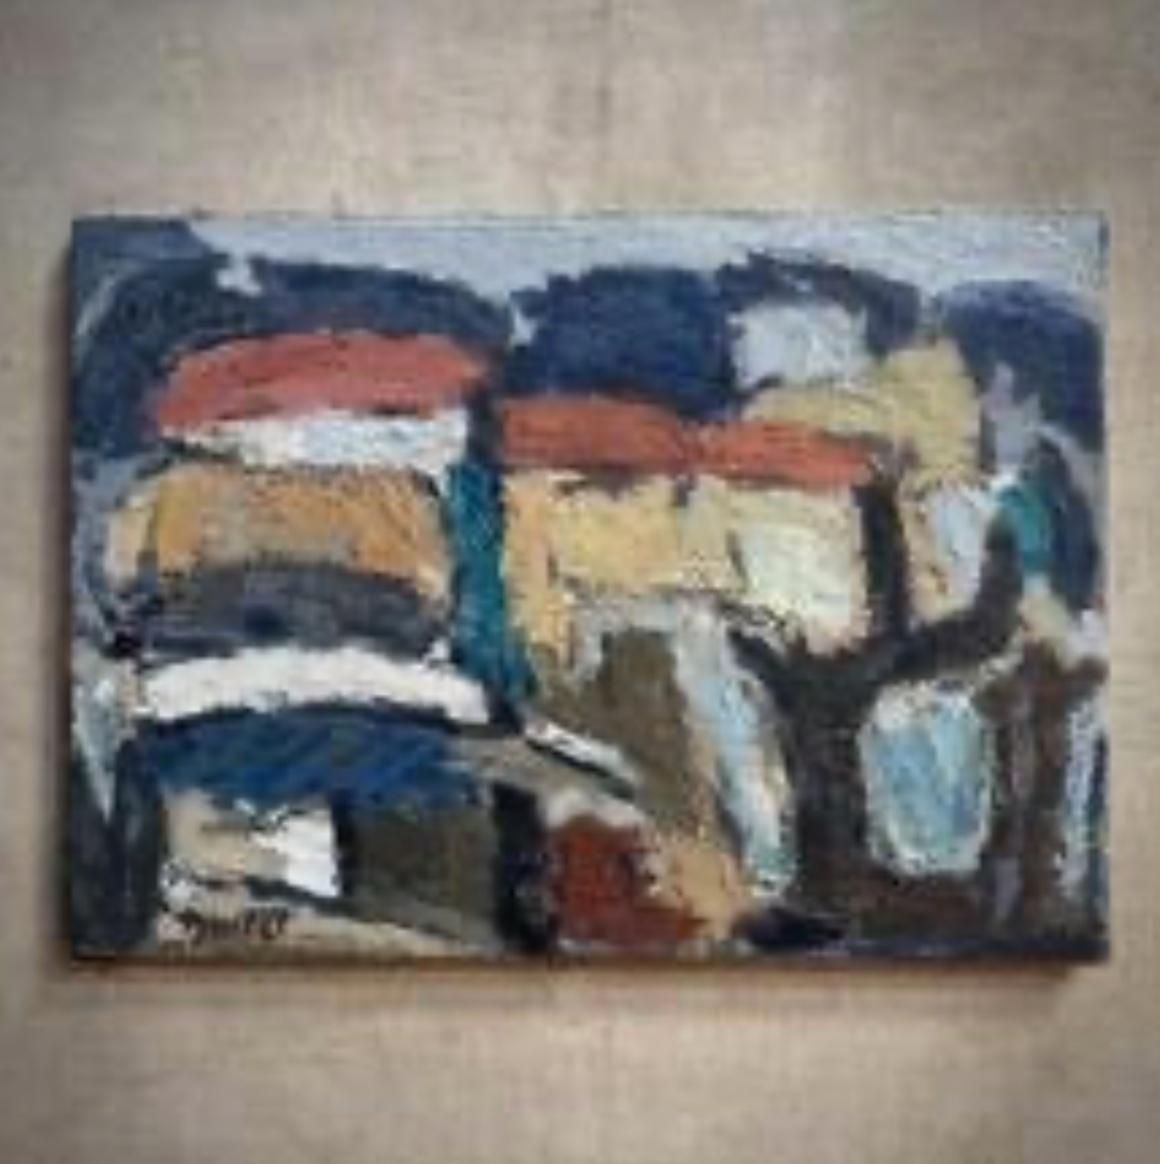 Abstract oil painting on canvas signed by French modernist painter Marcel Ducret. Faintly evocative of a landscape, the painting is bold, graphic and textural, with an expressive use of the impasto technique. 

France, dated 1966

Dimensions: 18